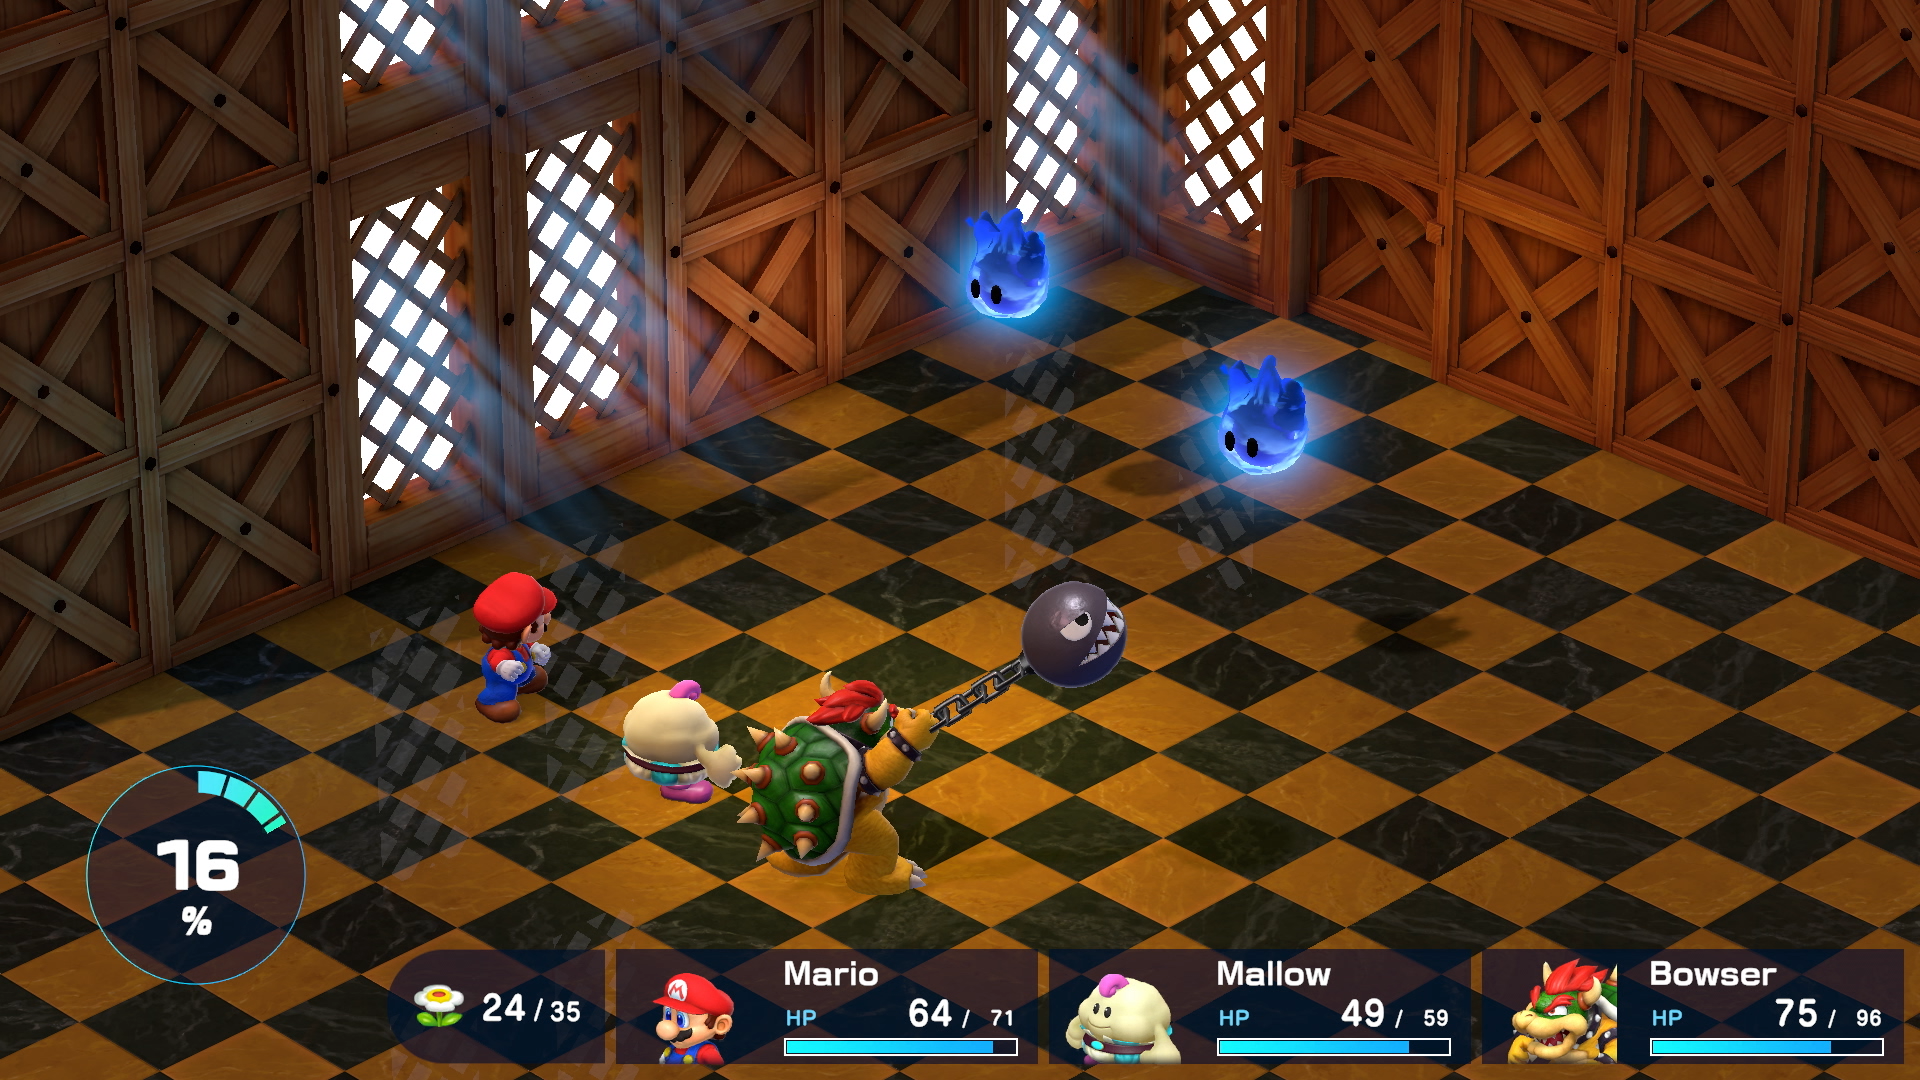 Super Mario RPG is now my favourite Mario game